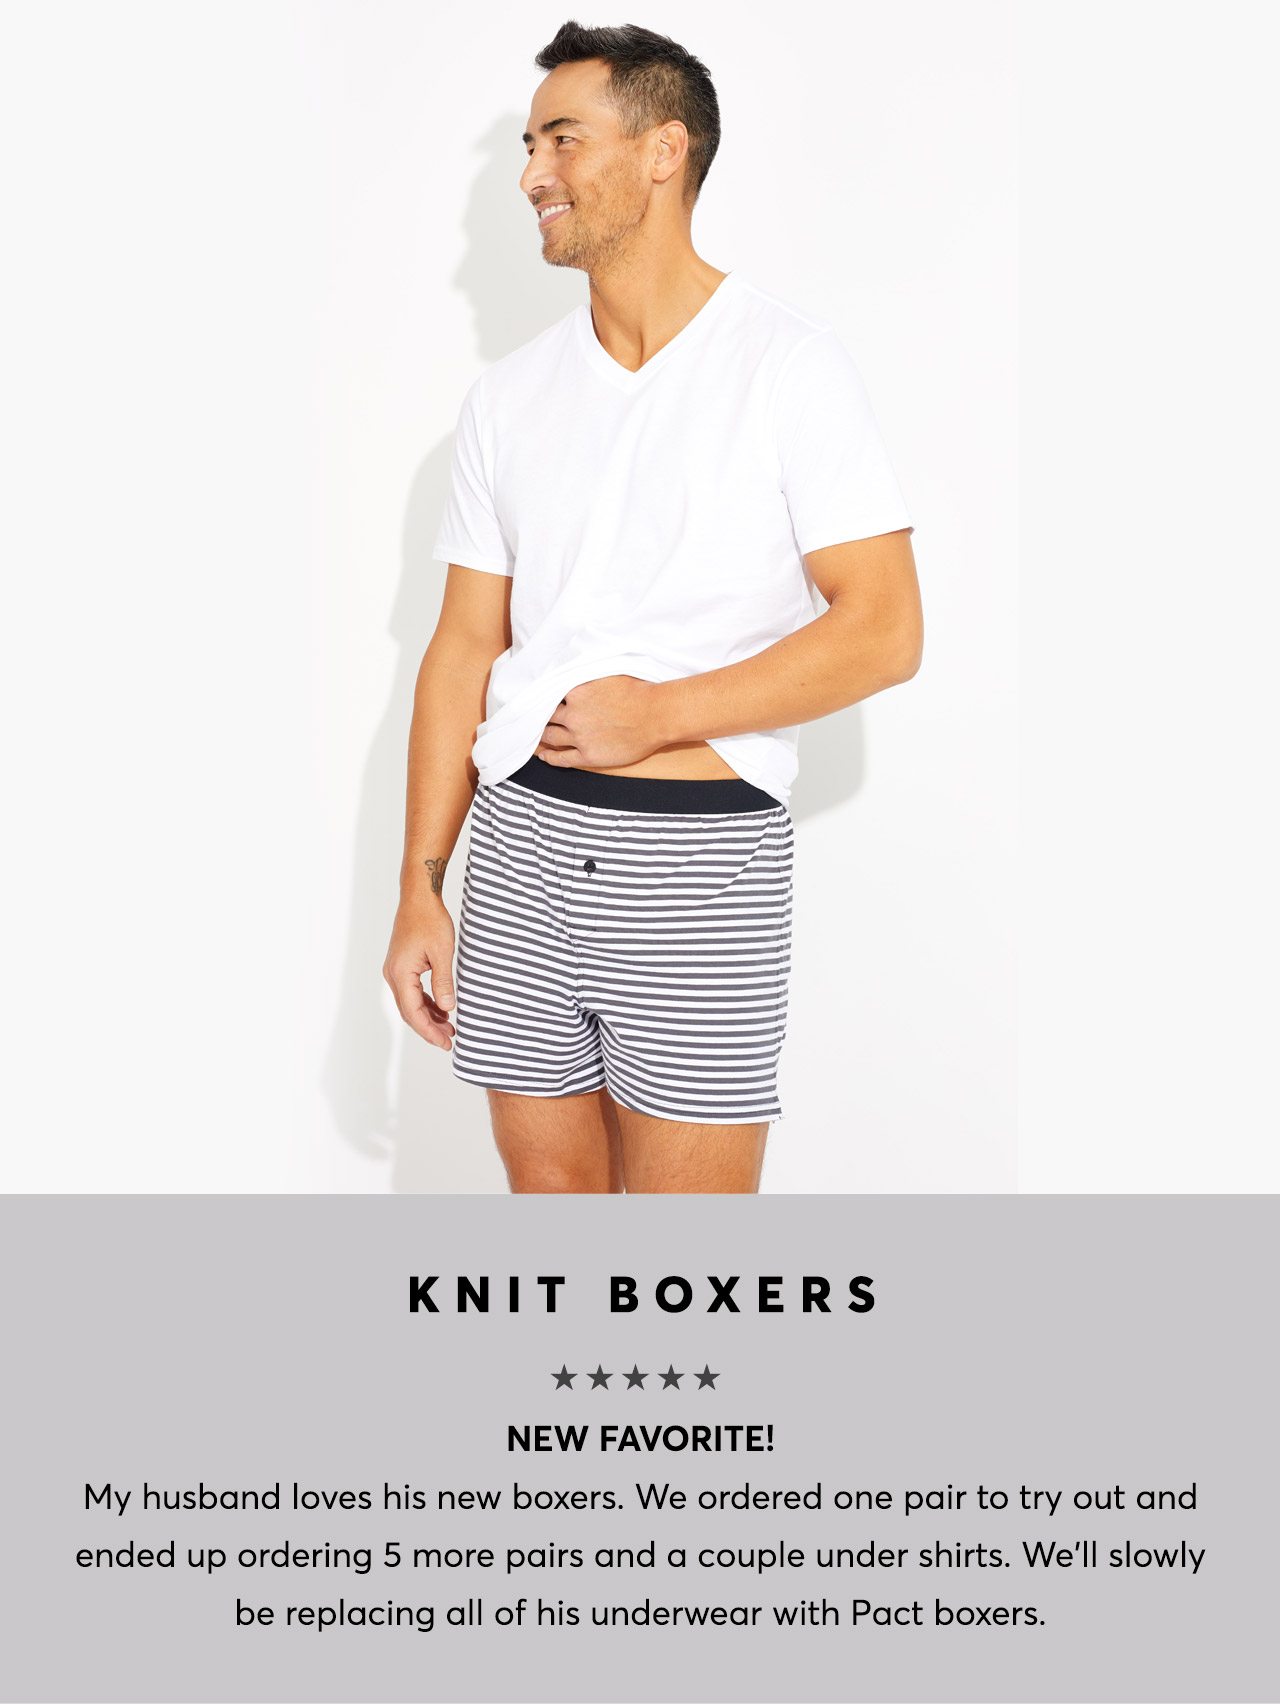 Knit Boxers: New Favorite! My husband loves his new boxers. We ordered one pair to try out and ended up ordering 5 more pairs and a couple under shirts. We'll slowly be replacing all of his underwear with Pact boxers.